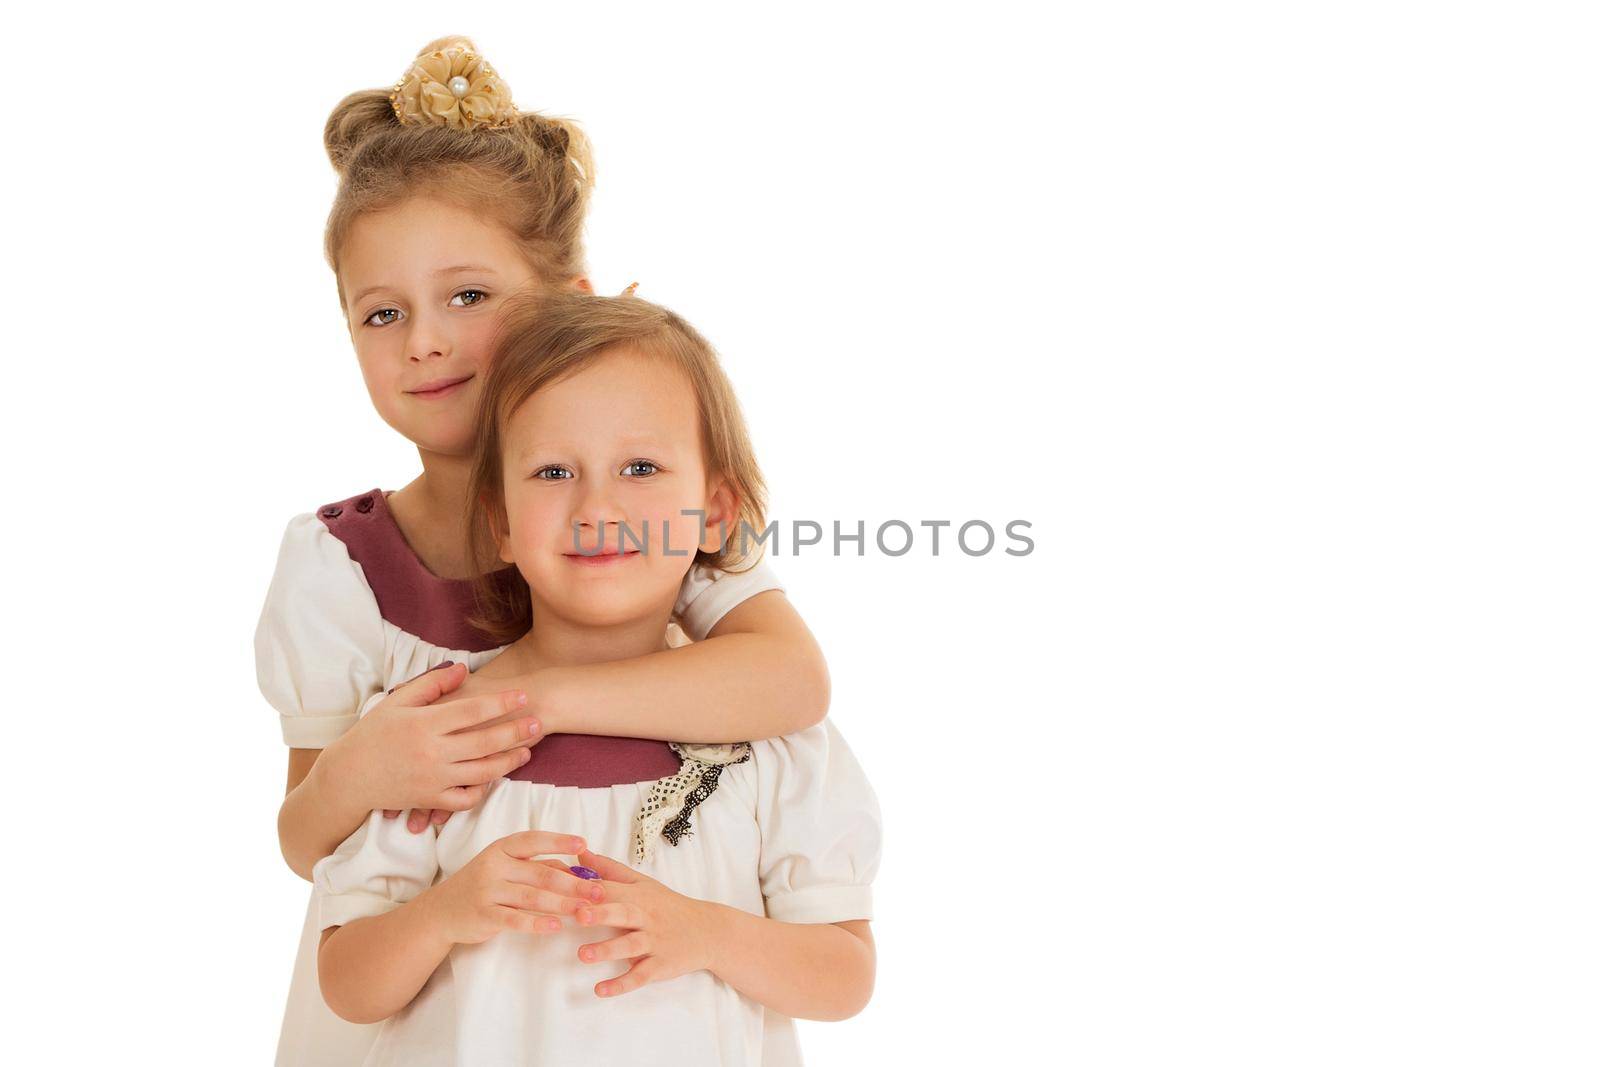 Girls in matching dresses hug - Isolated on white background